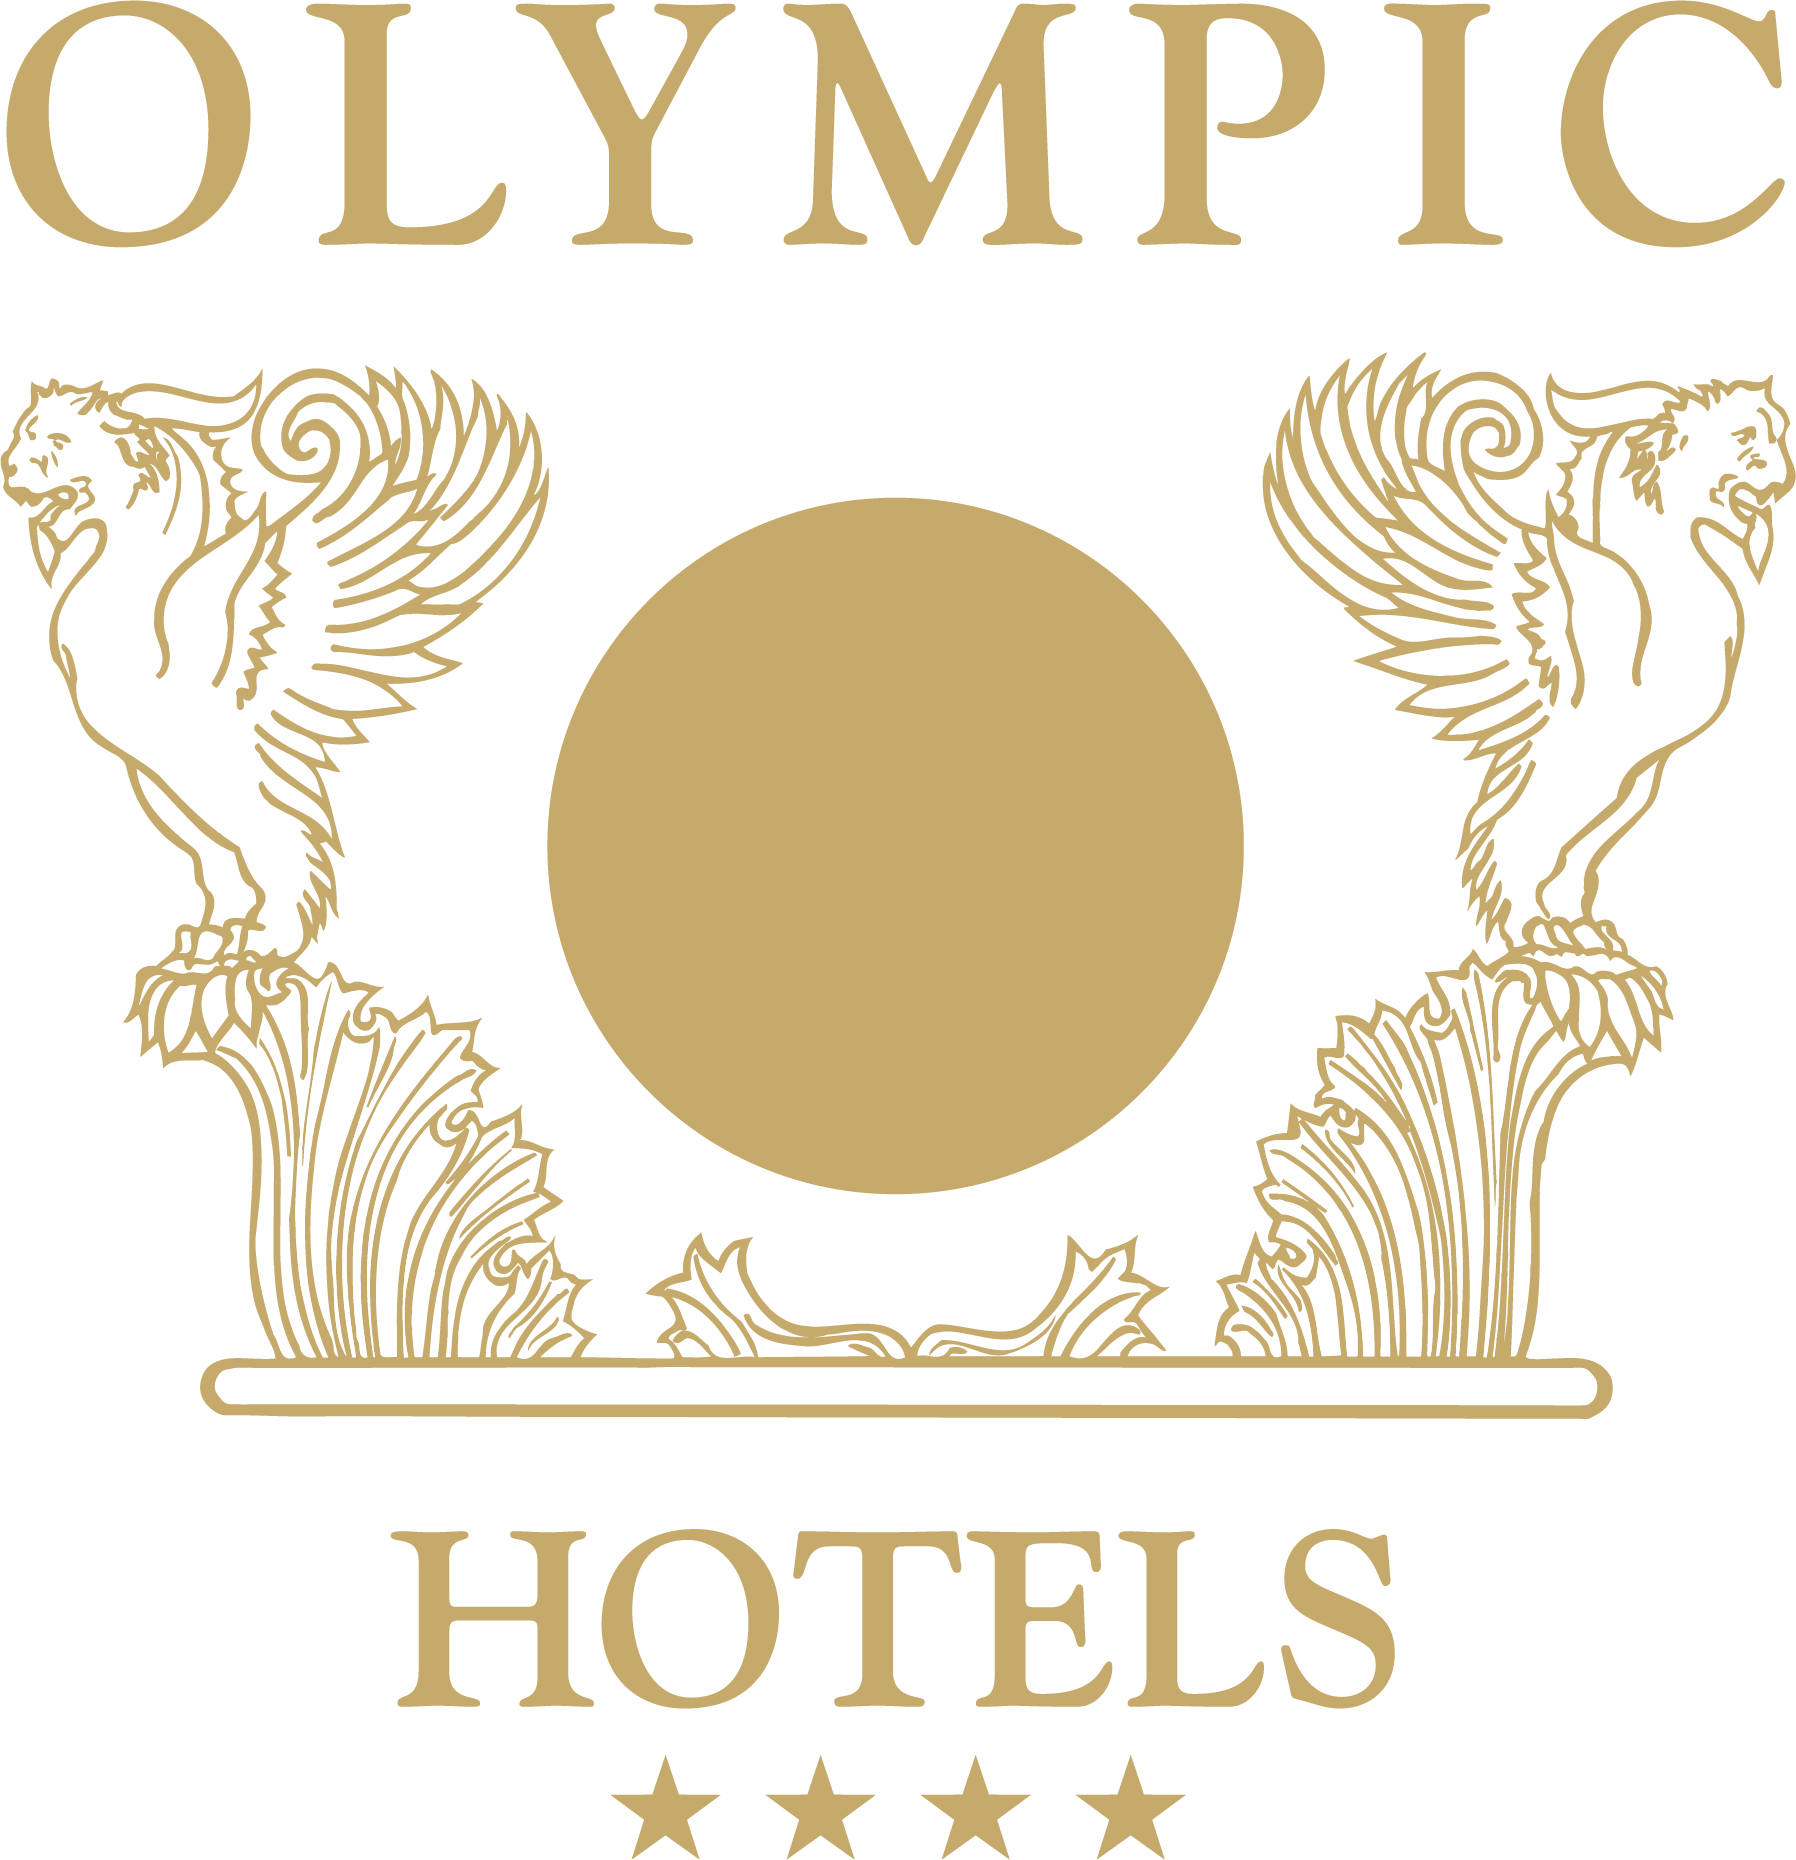 Olympic Hotels